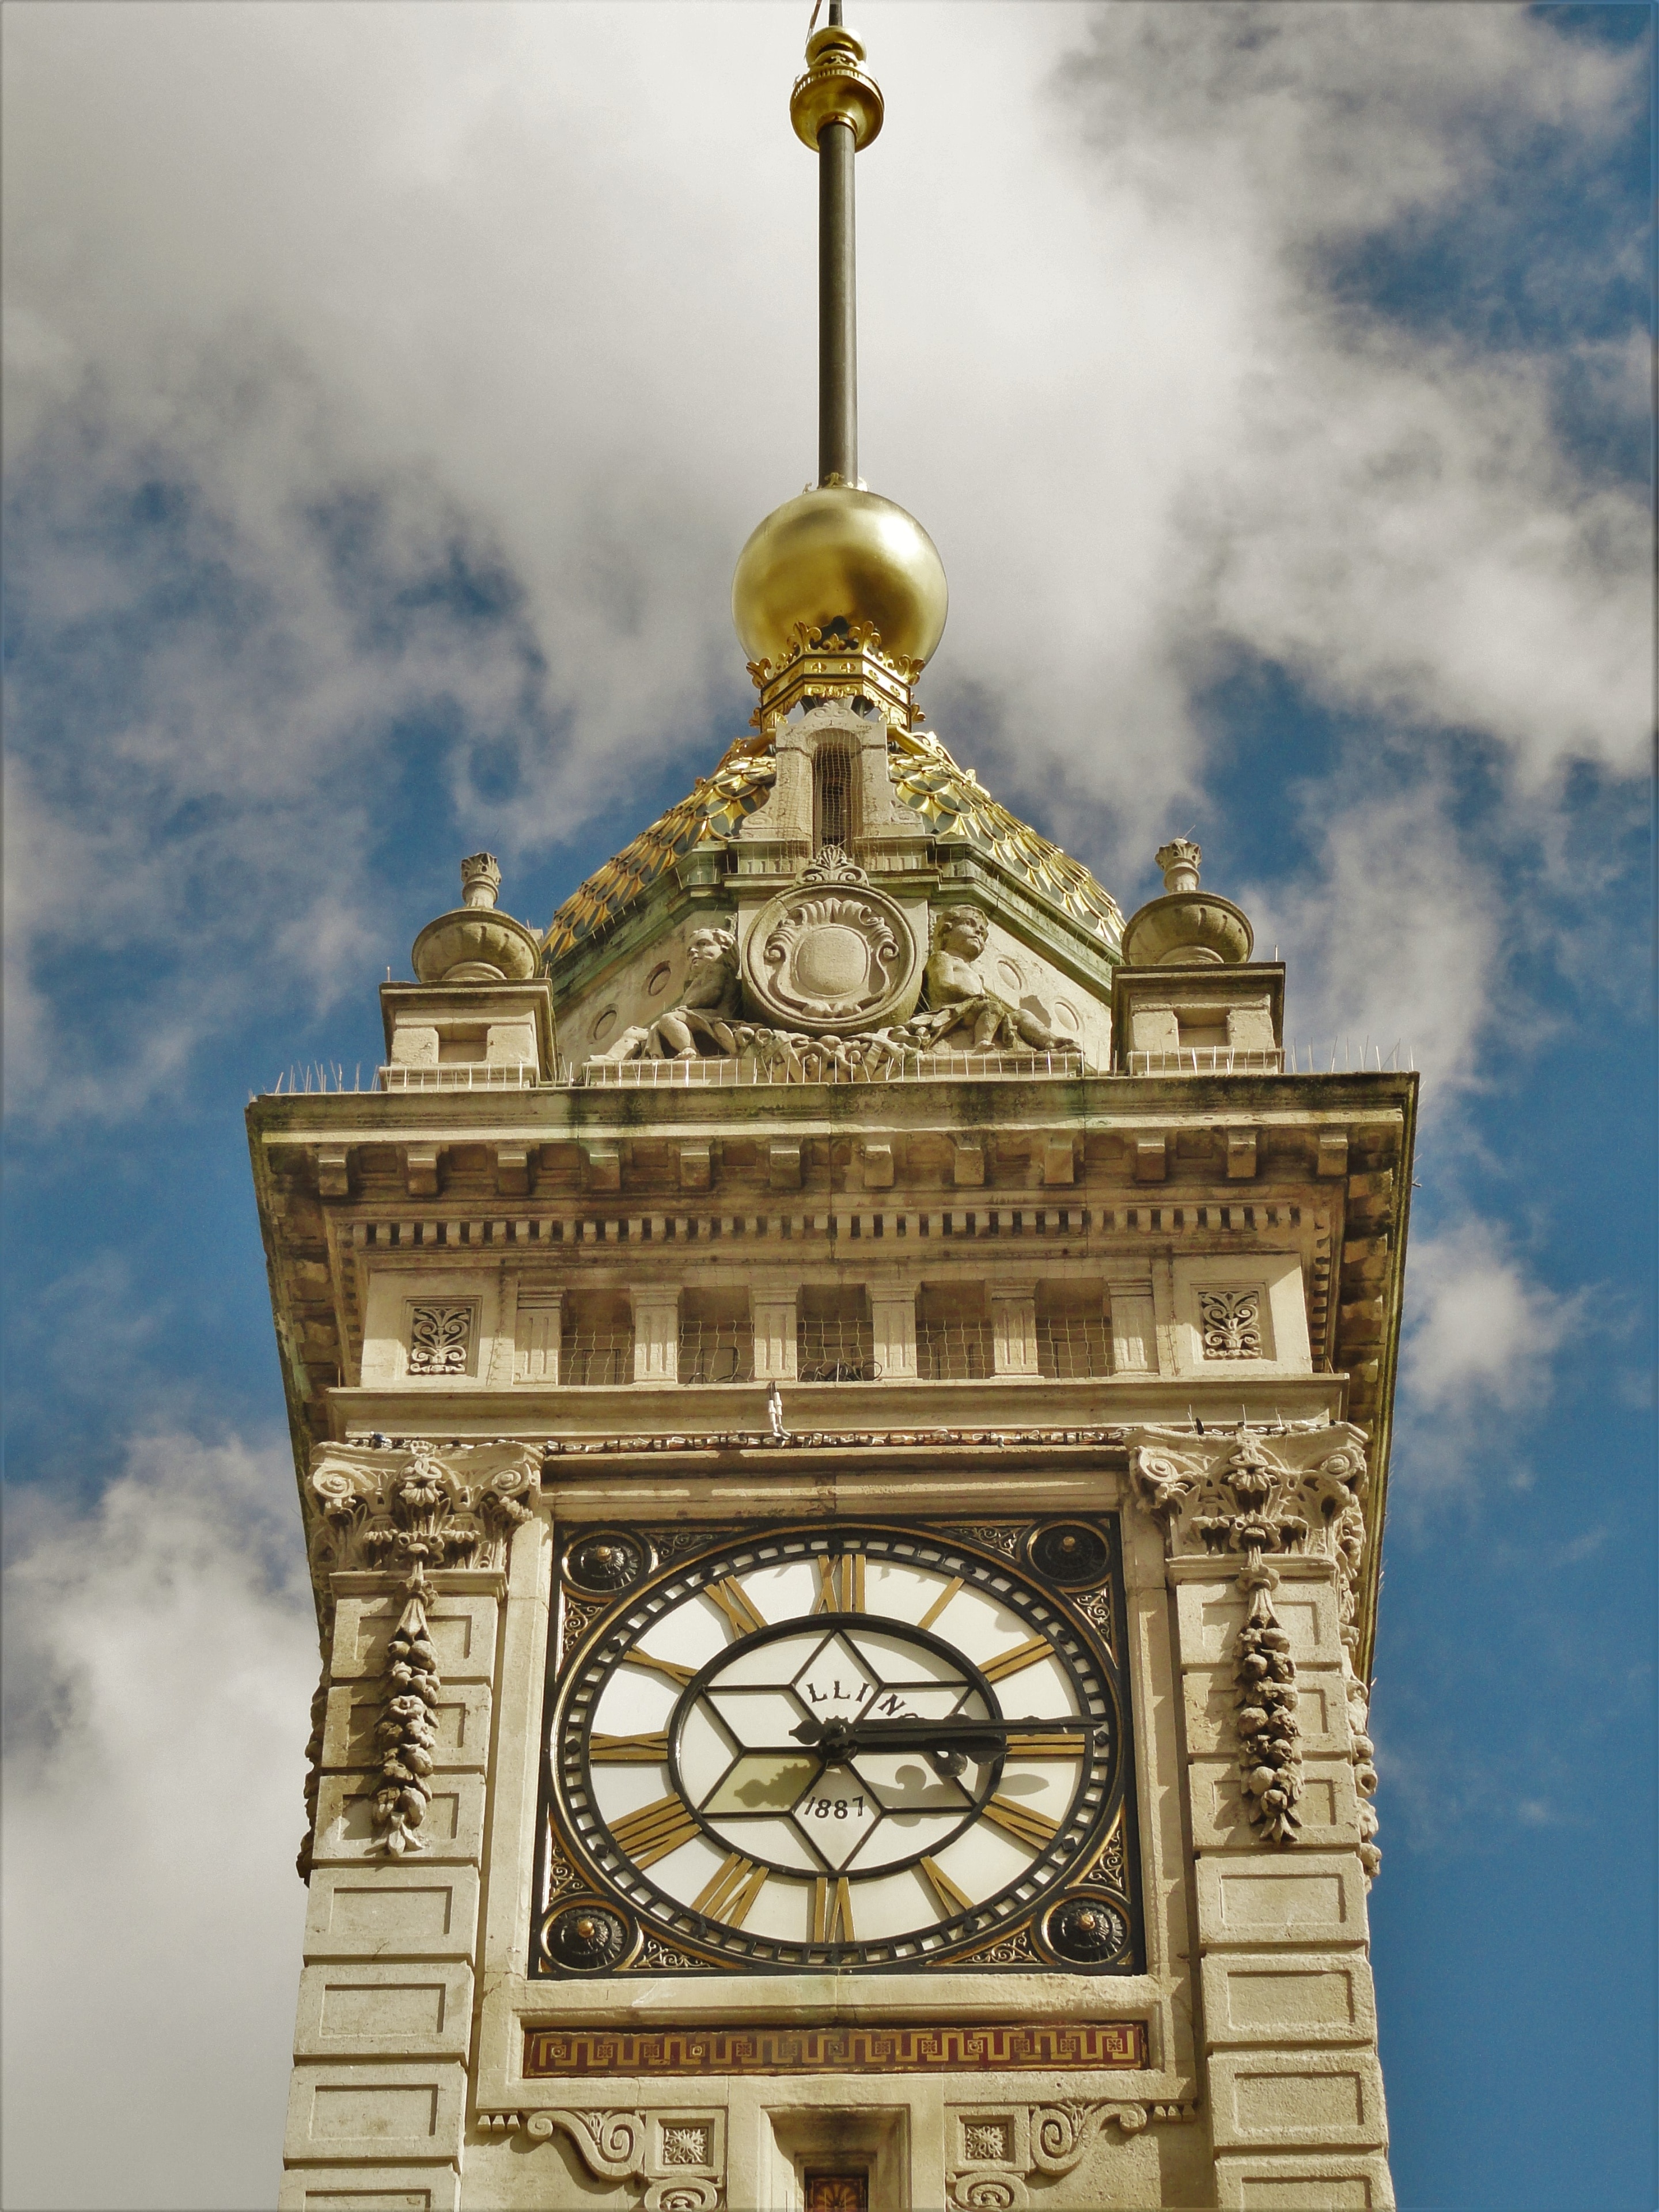 Close up shot of Jubilee Clock Tower in Brighton